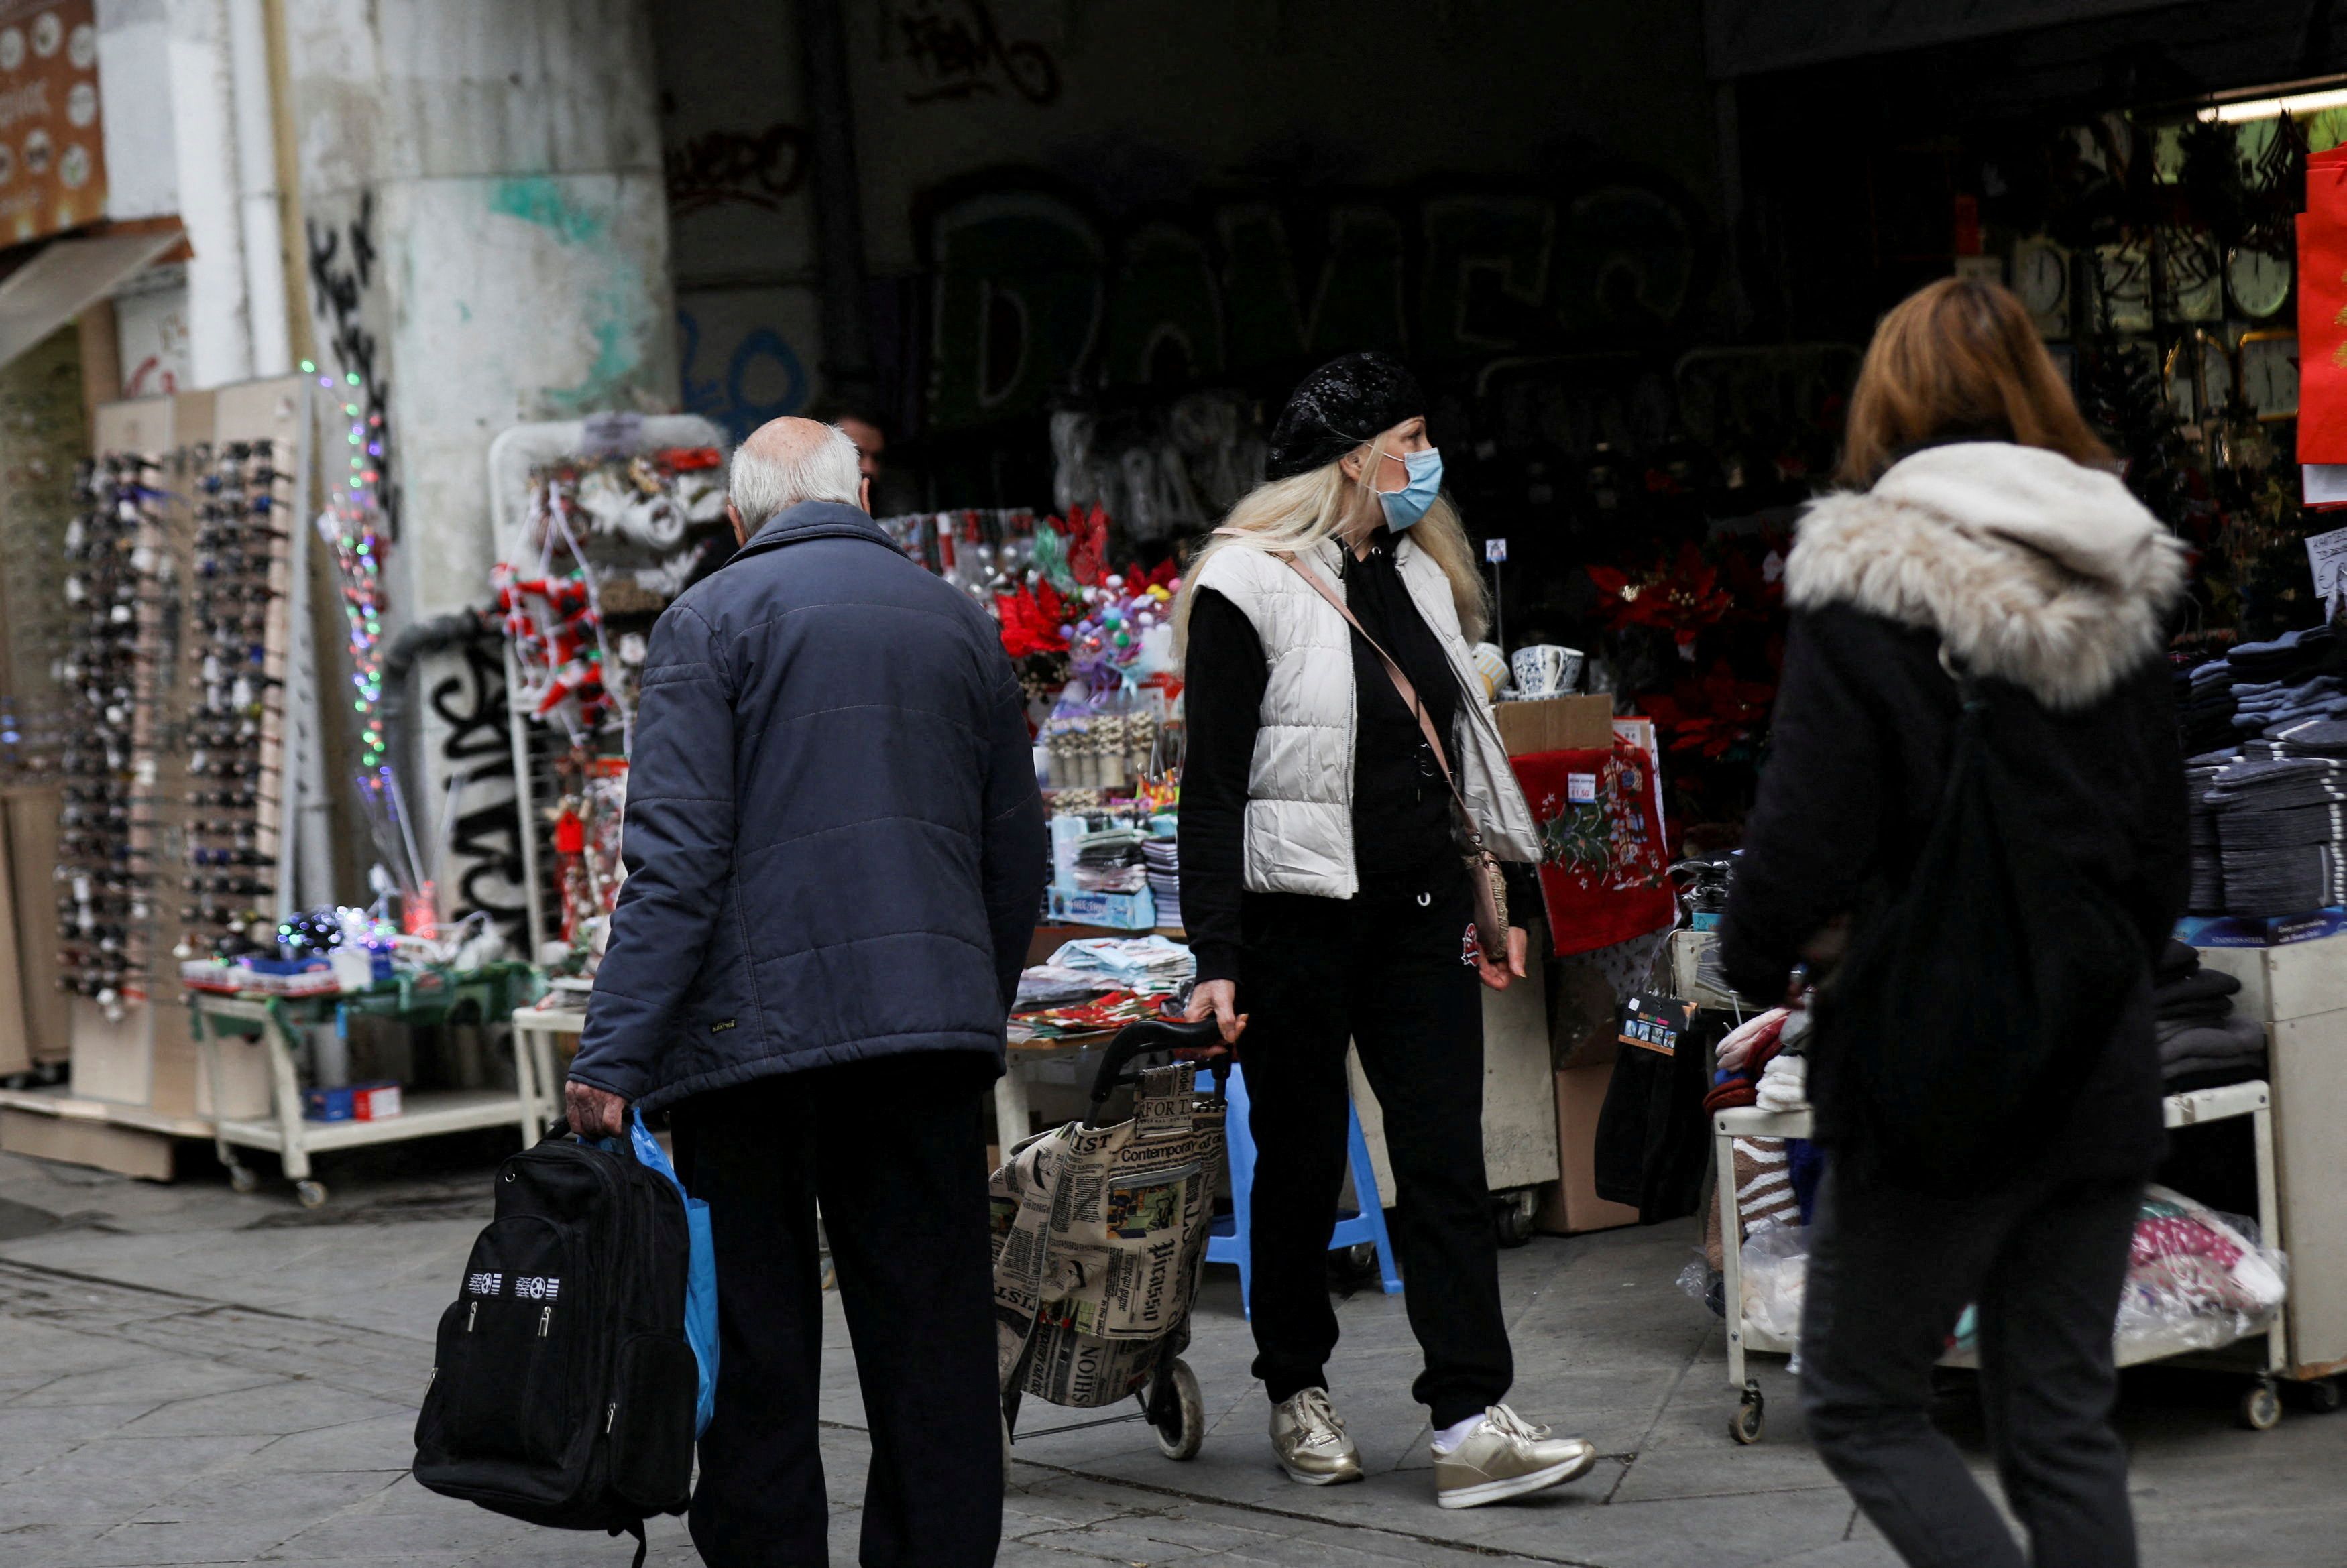 People wearing protective face masks shop amid the coronavirus disease (COVID-19) outbreak in Athens, Greece, December 29, 2021. REUTERS/Louiza Vradi